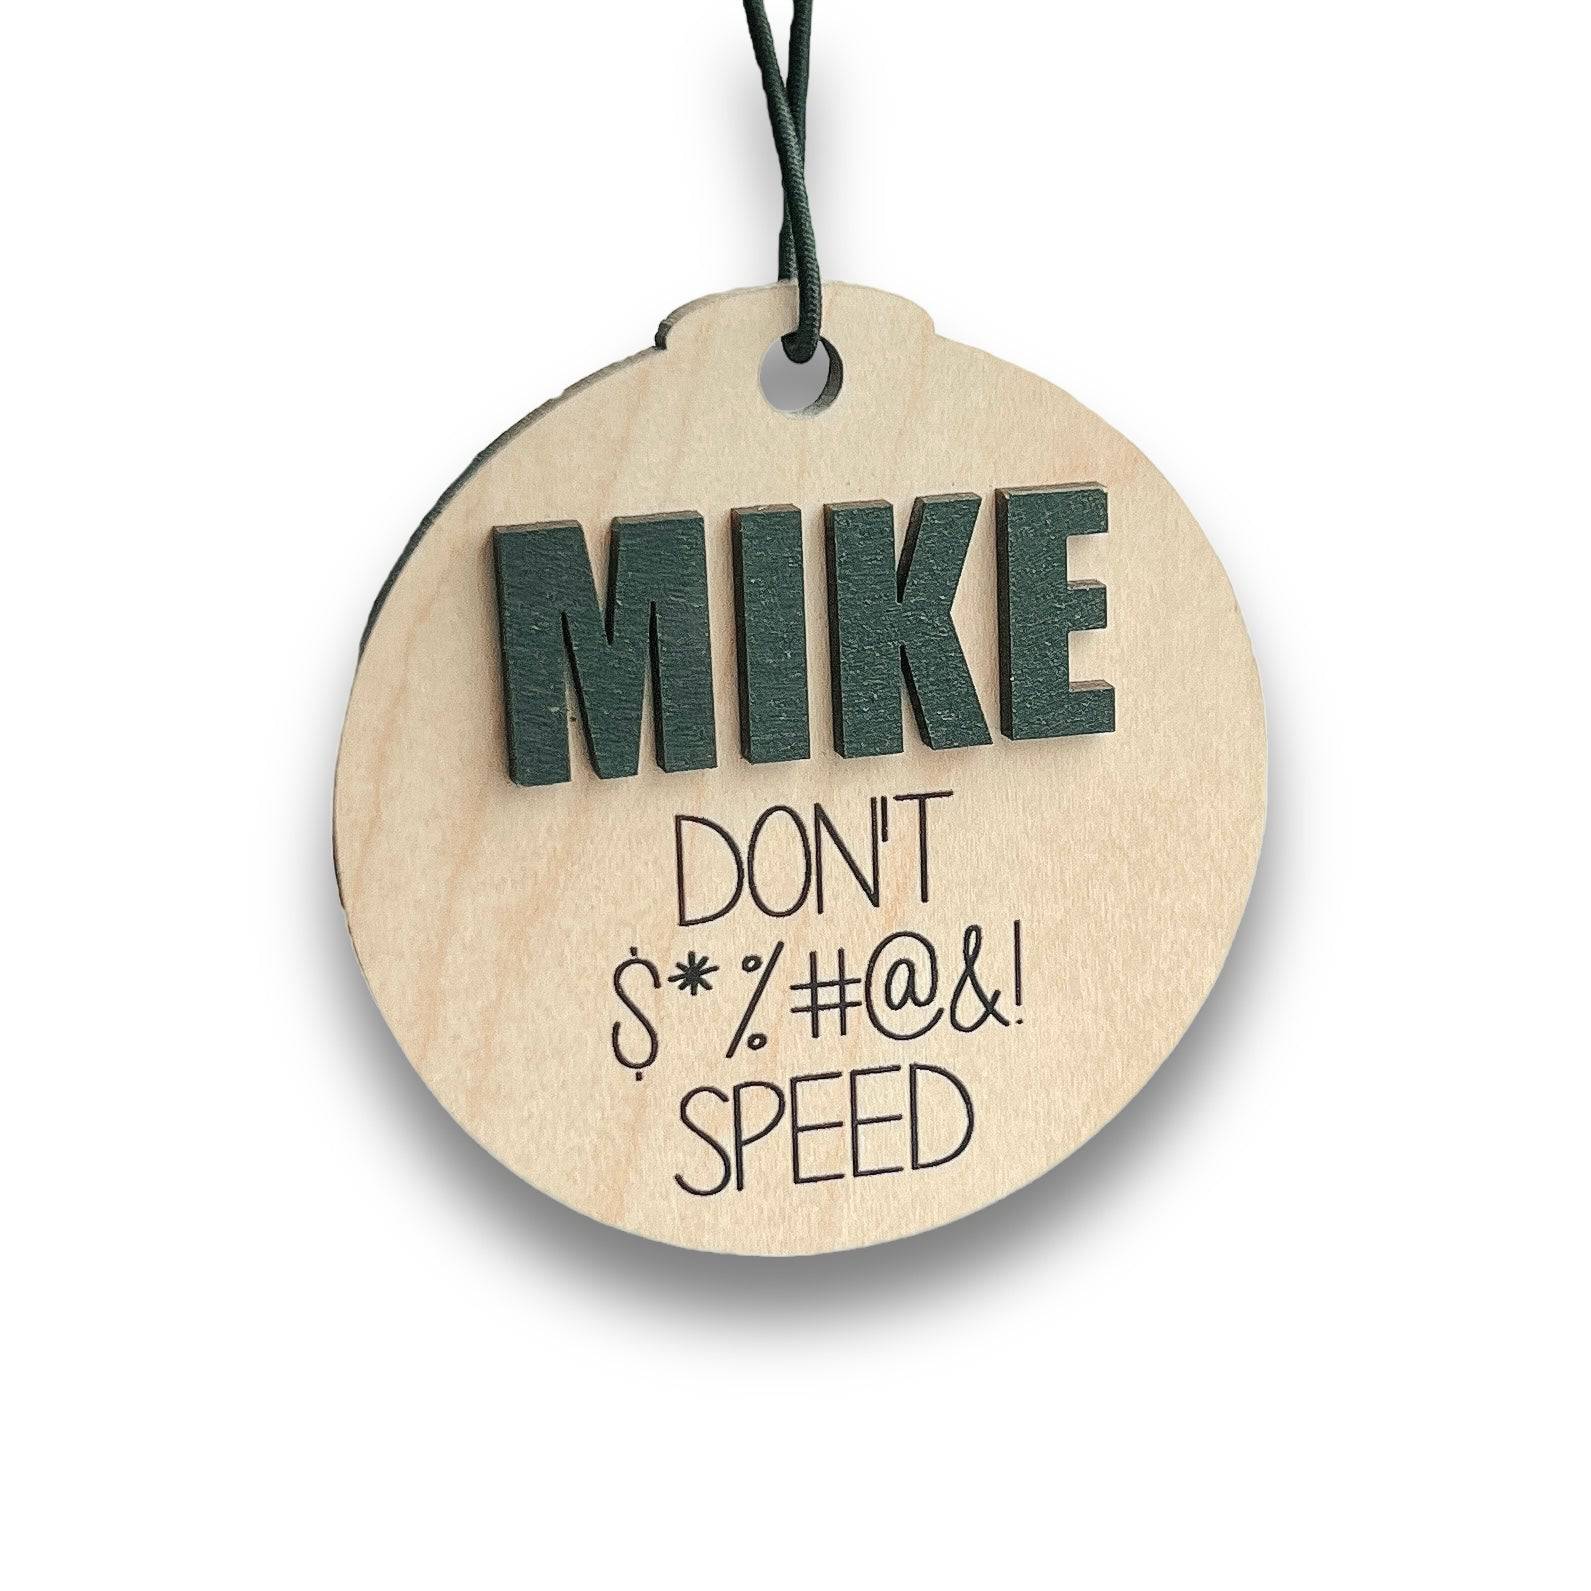 Personalized "Don't F$%#@& Speed" Wood Car Charm - Sticks & Doodles